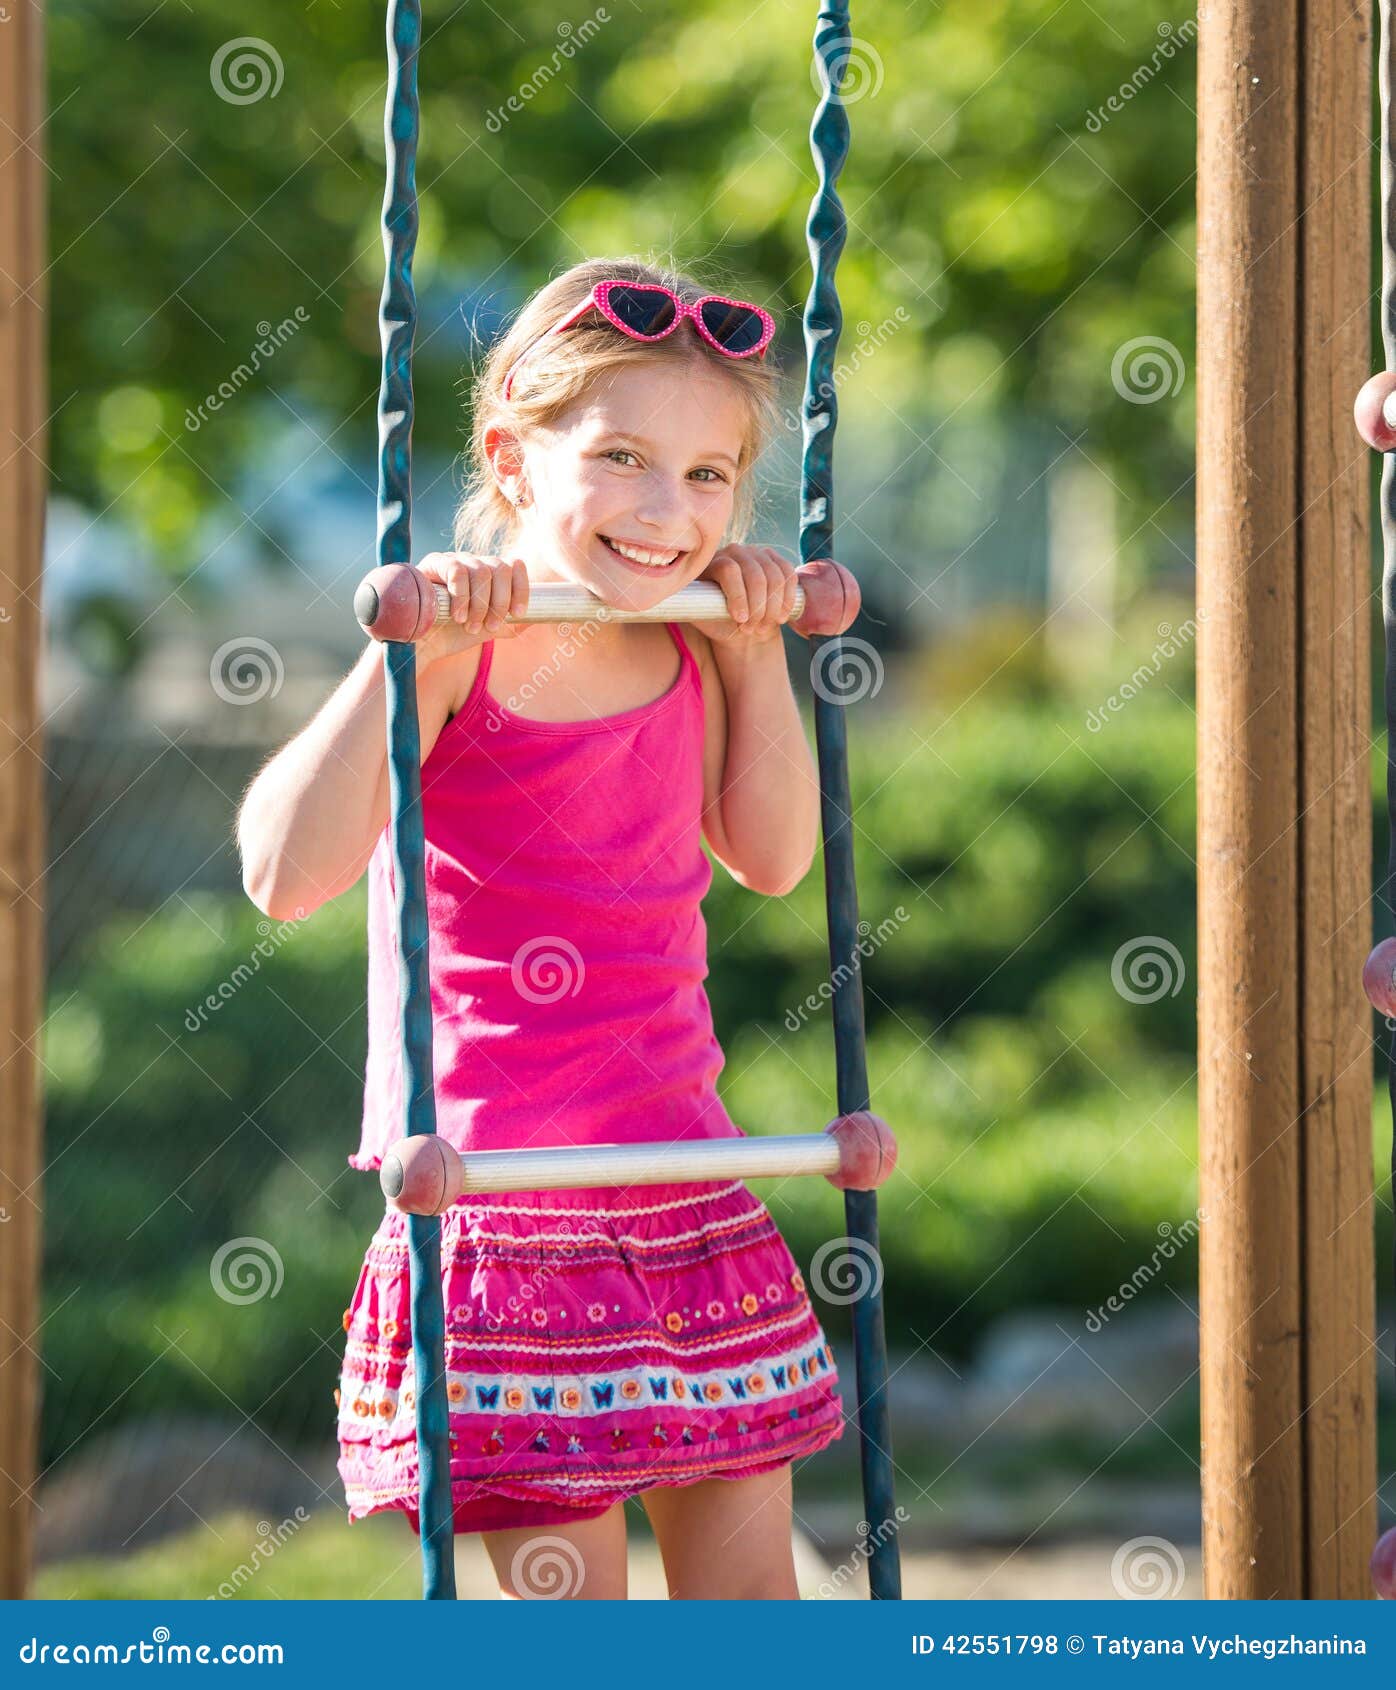 Little Girl on Outdoor Playground Stock Photo - Image of activity ...